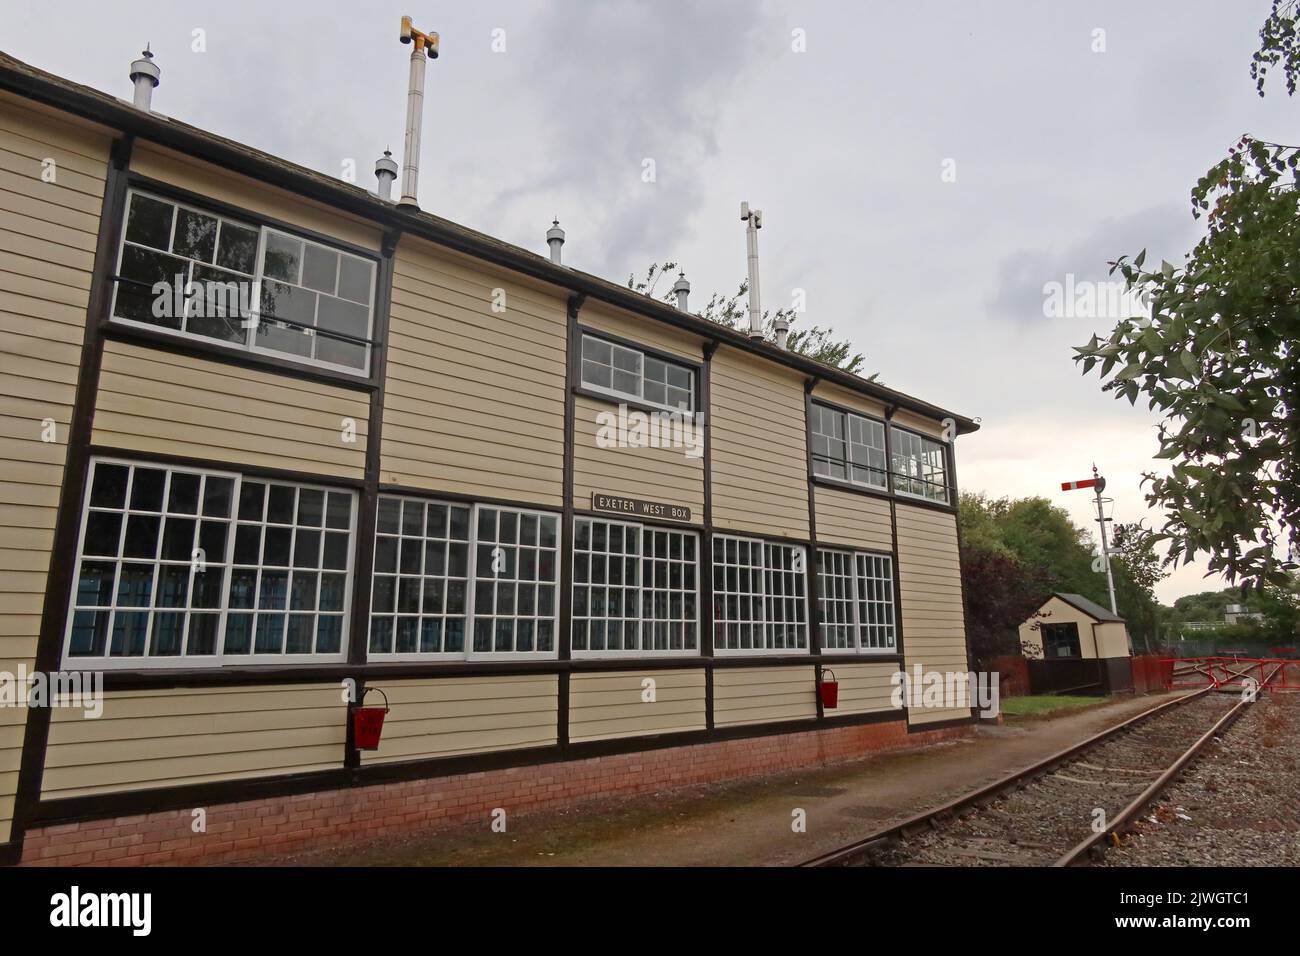 Exterior of the Exeter West Signal Box, reconstructed at Crewe, Cheshire, England, UK, CW1 2DB Stock Photo